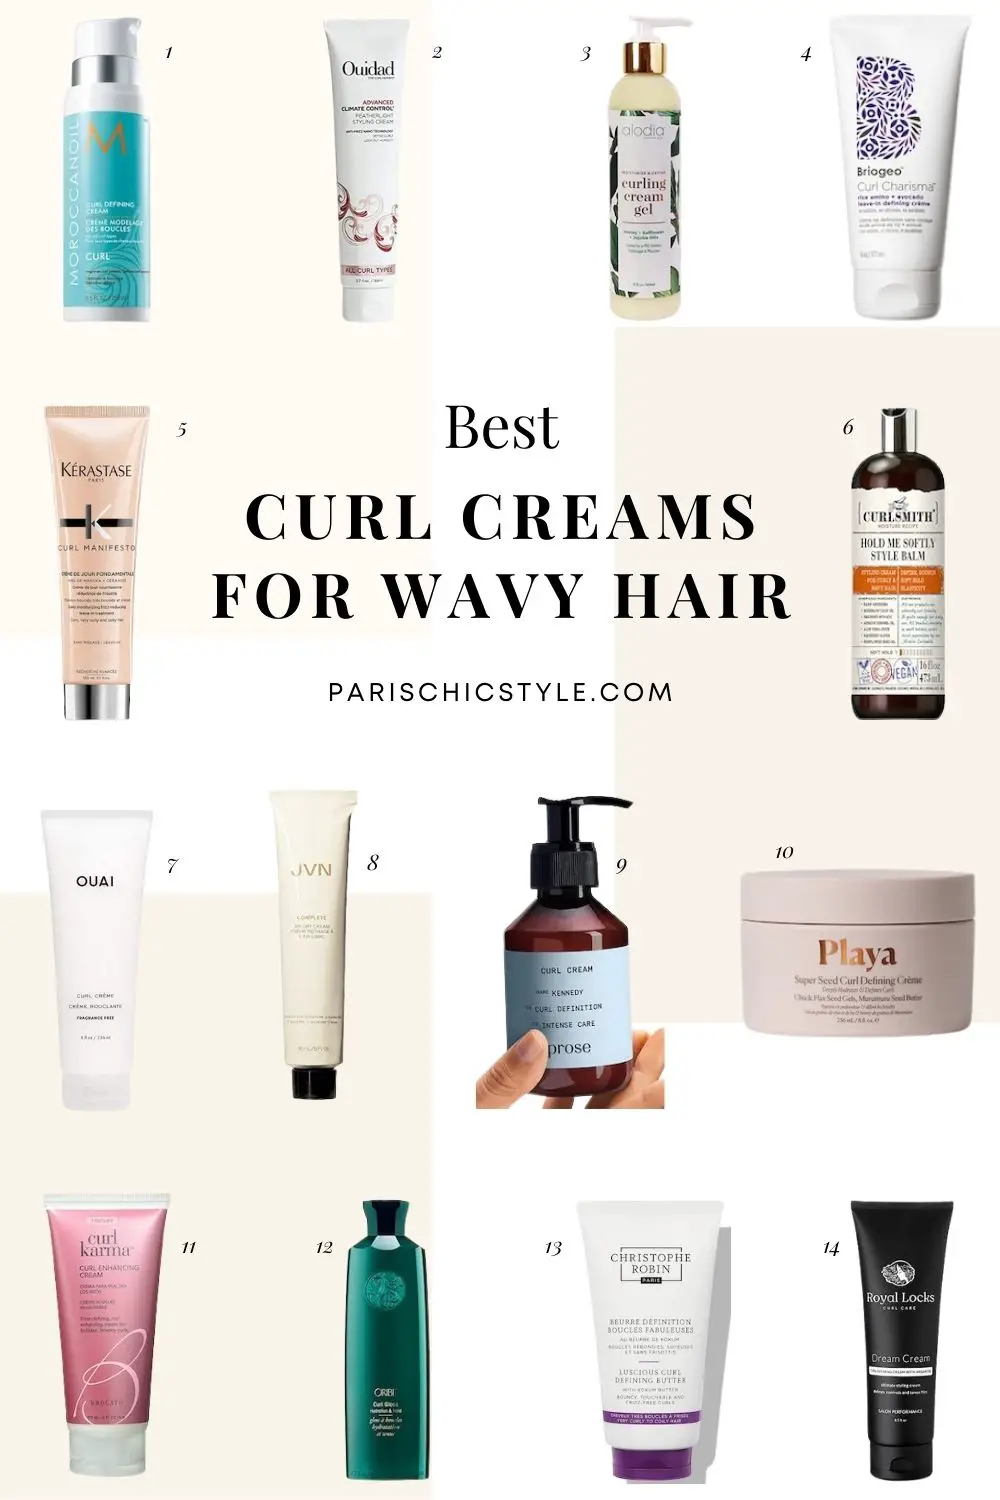 Haircare For Curly, Wavy, Straight, Dry & Damaged Hair: Paris Chic Style